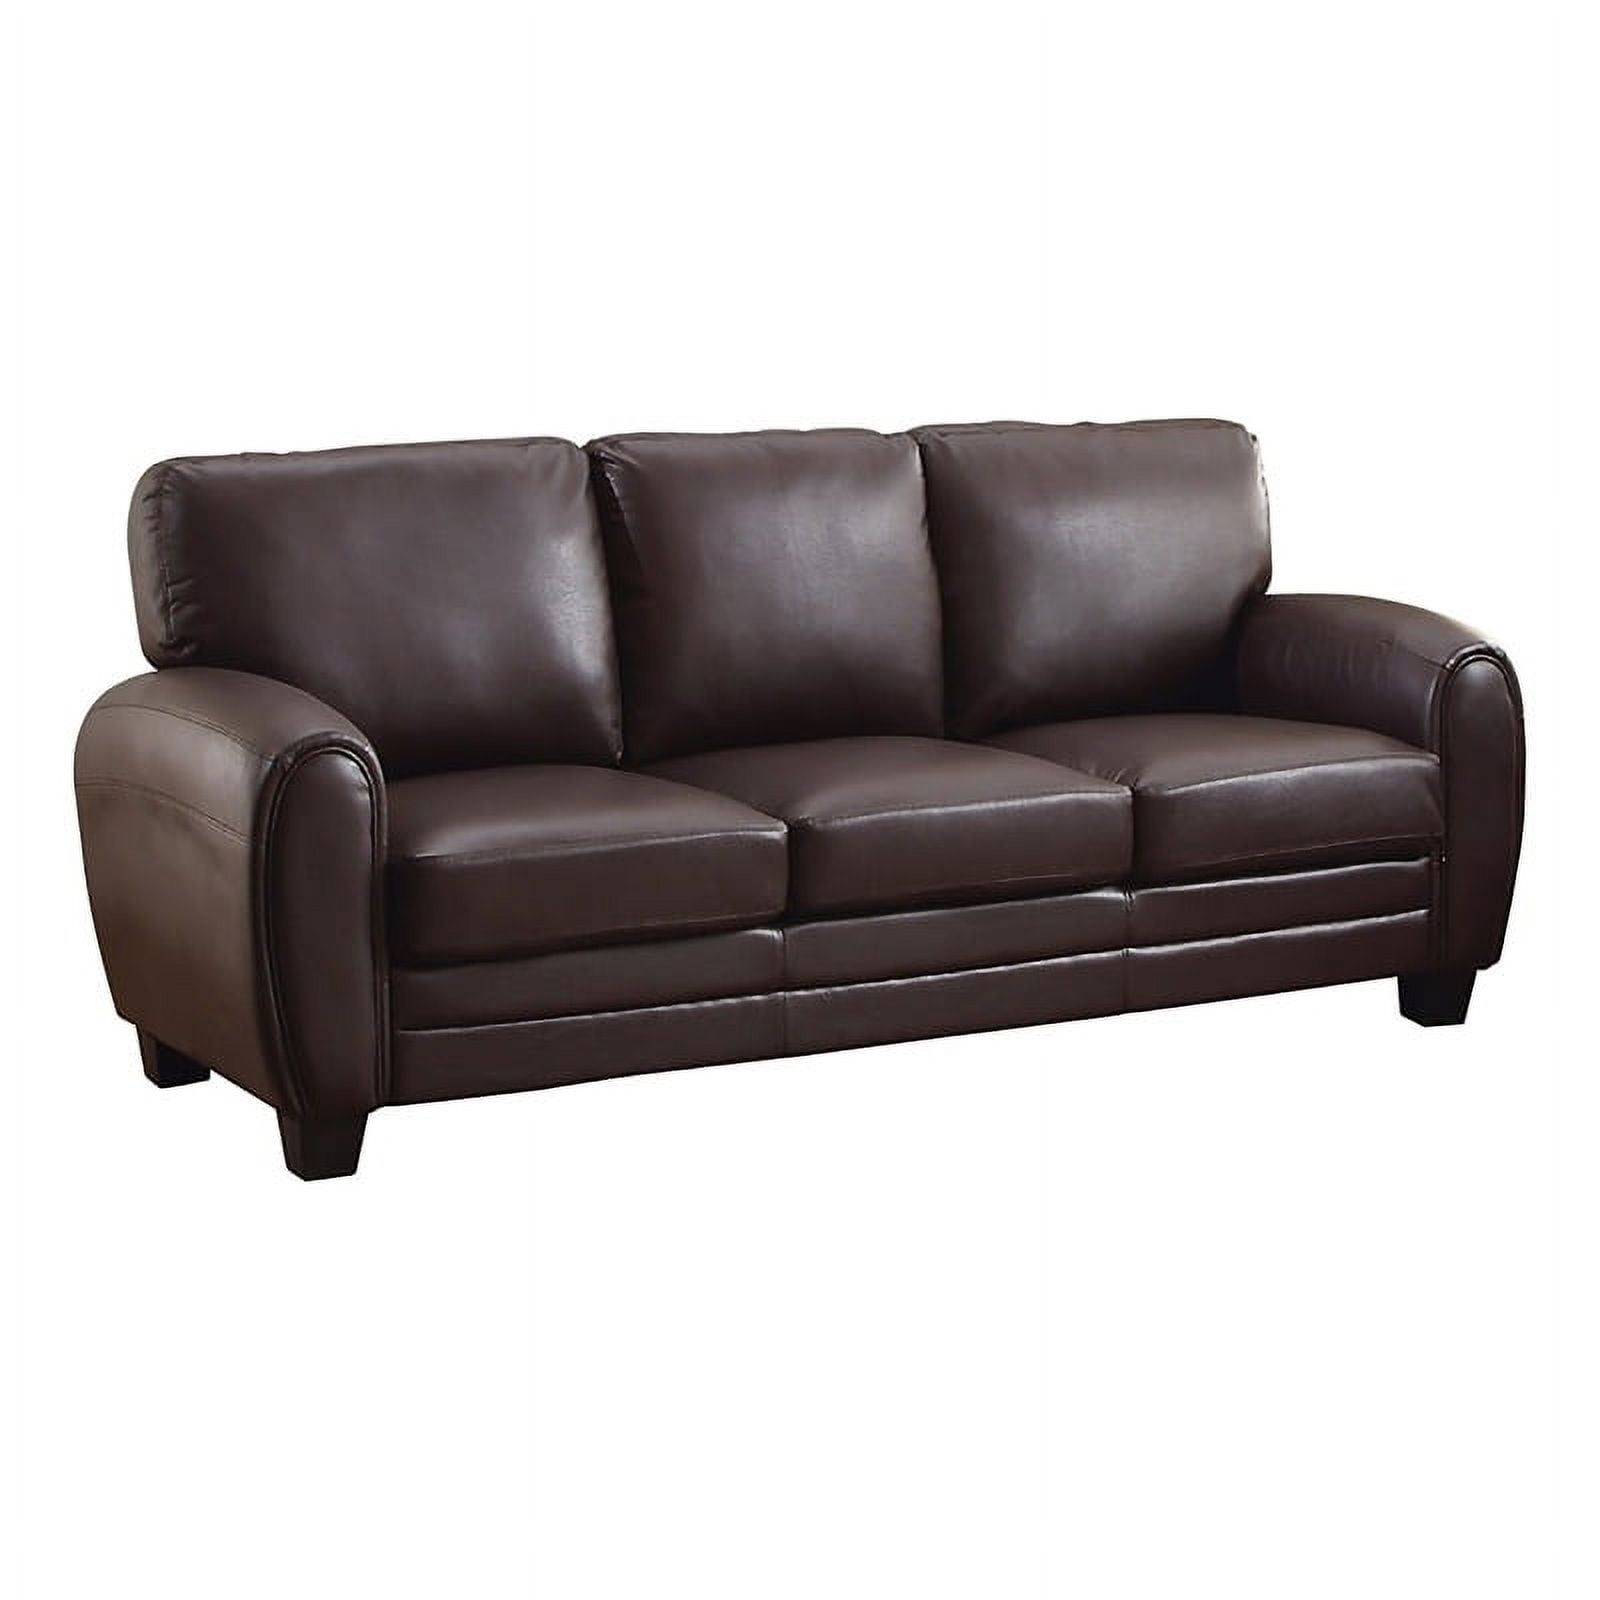 Pemberly Row 19" Contemporary Faux Leather Upholstered Sofa In Dark Brown –  Walmart Throughout Faux Leather Sofas In Dark Brown (View 11 of 15)